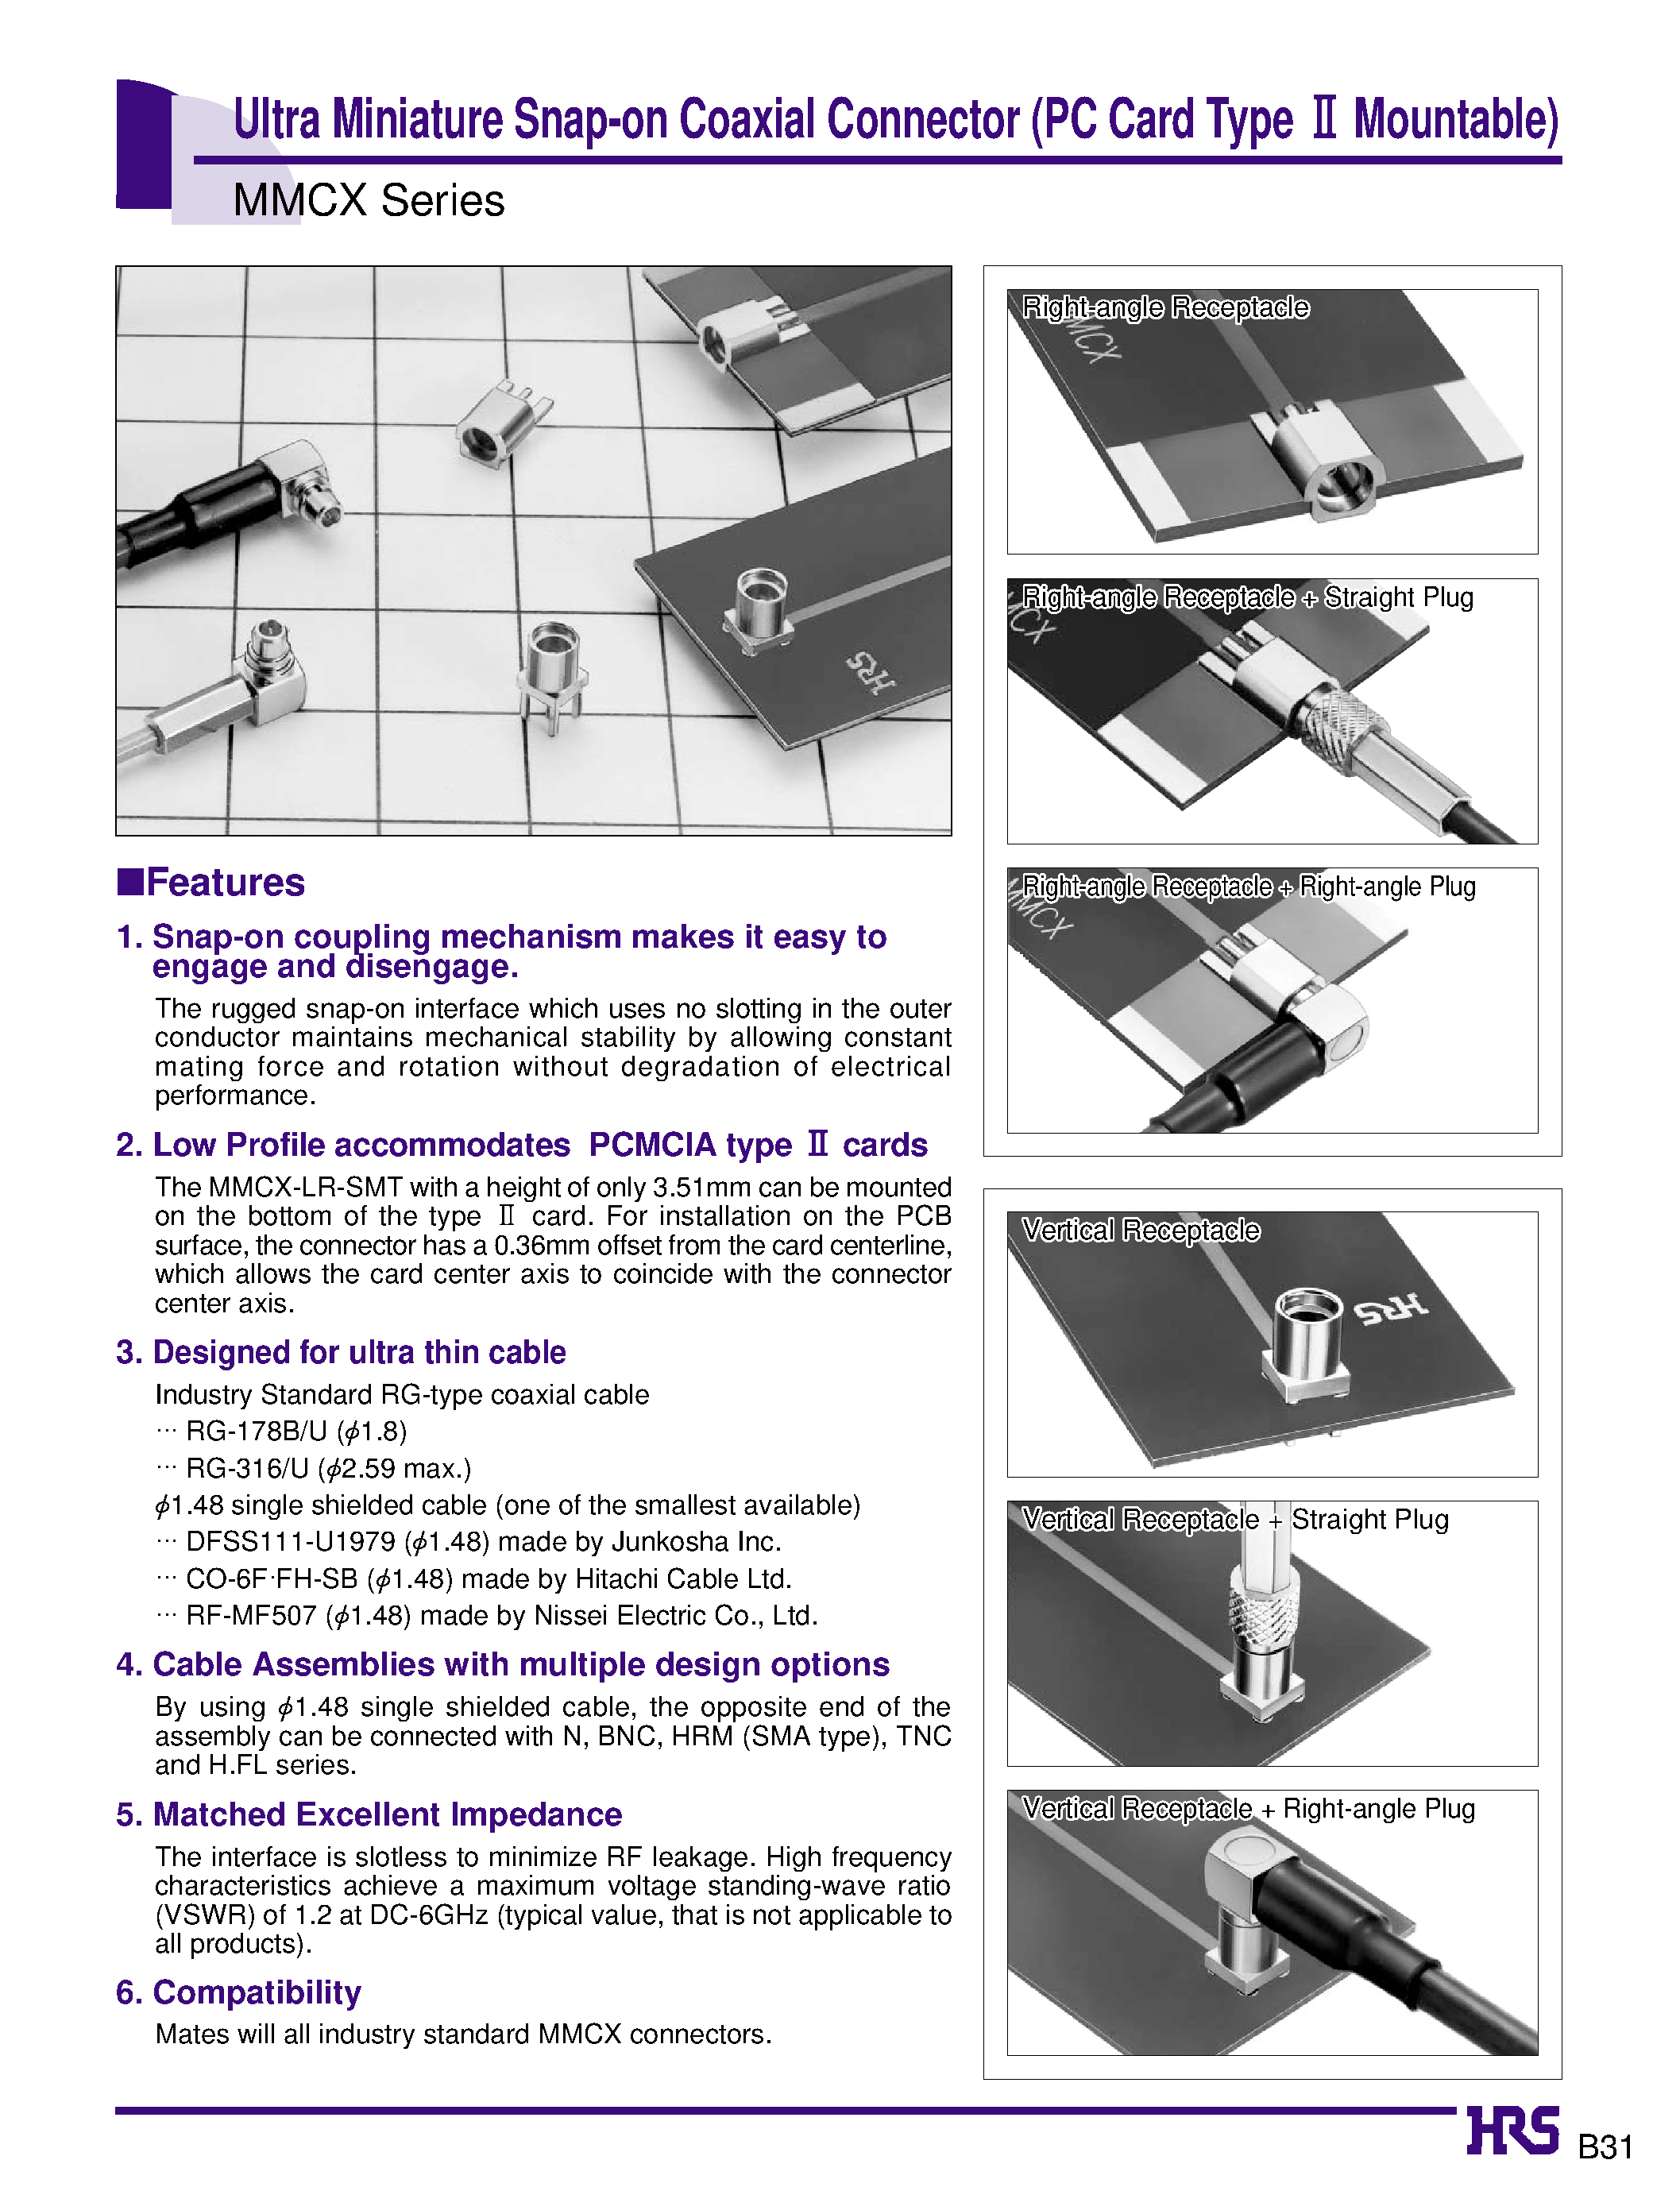 Datasheet MMCX-LP-178B/U - Ultra Miniature Snap-on Coaxial Connector (PC Card Type 2 Mountable) page 1